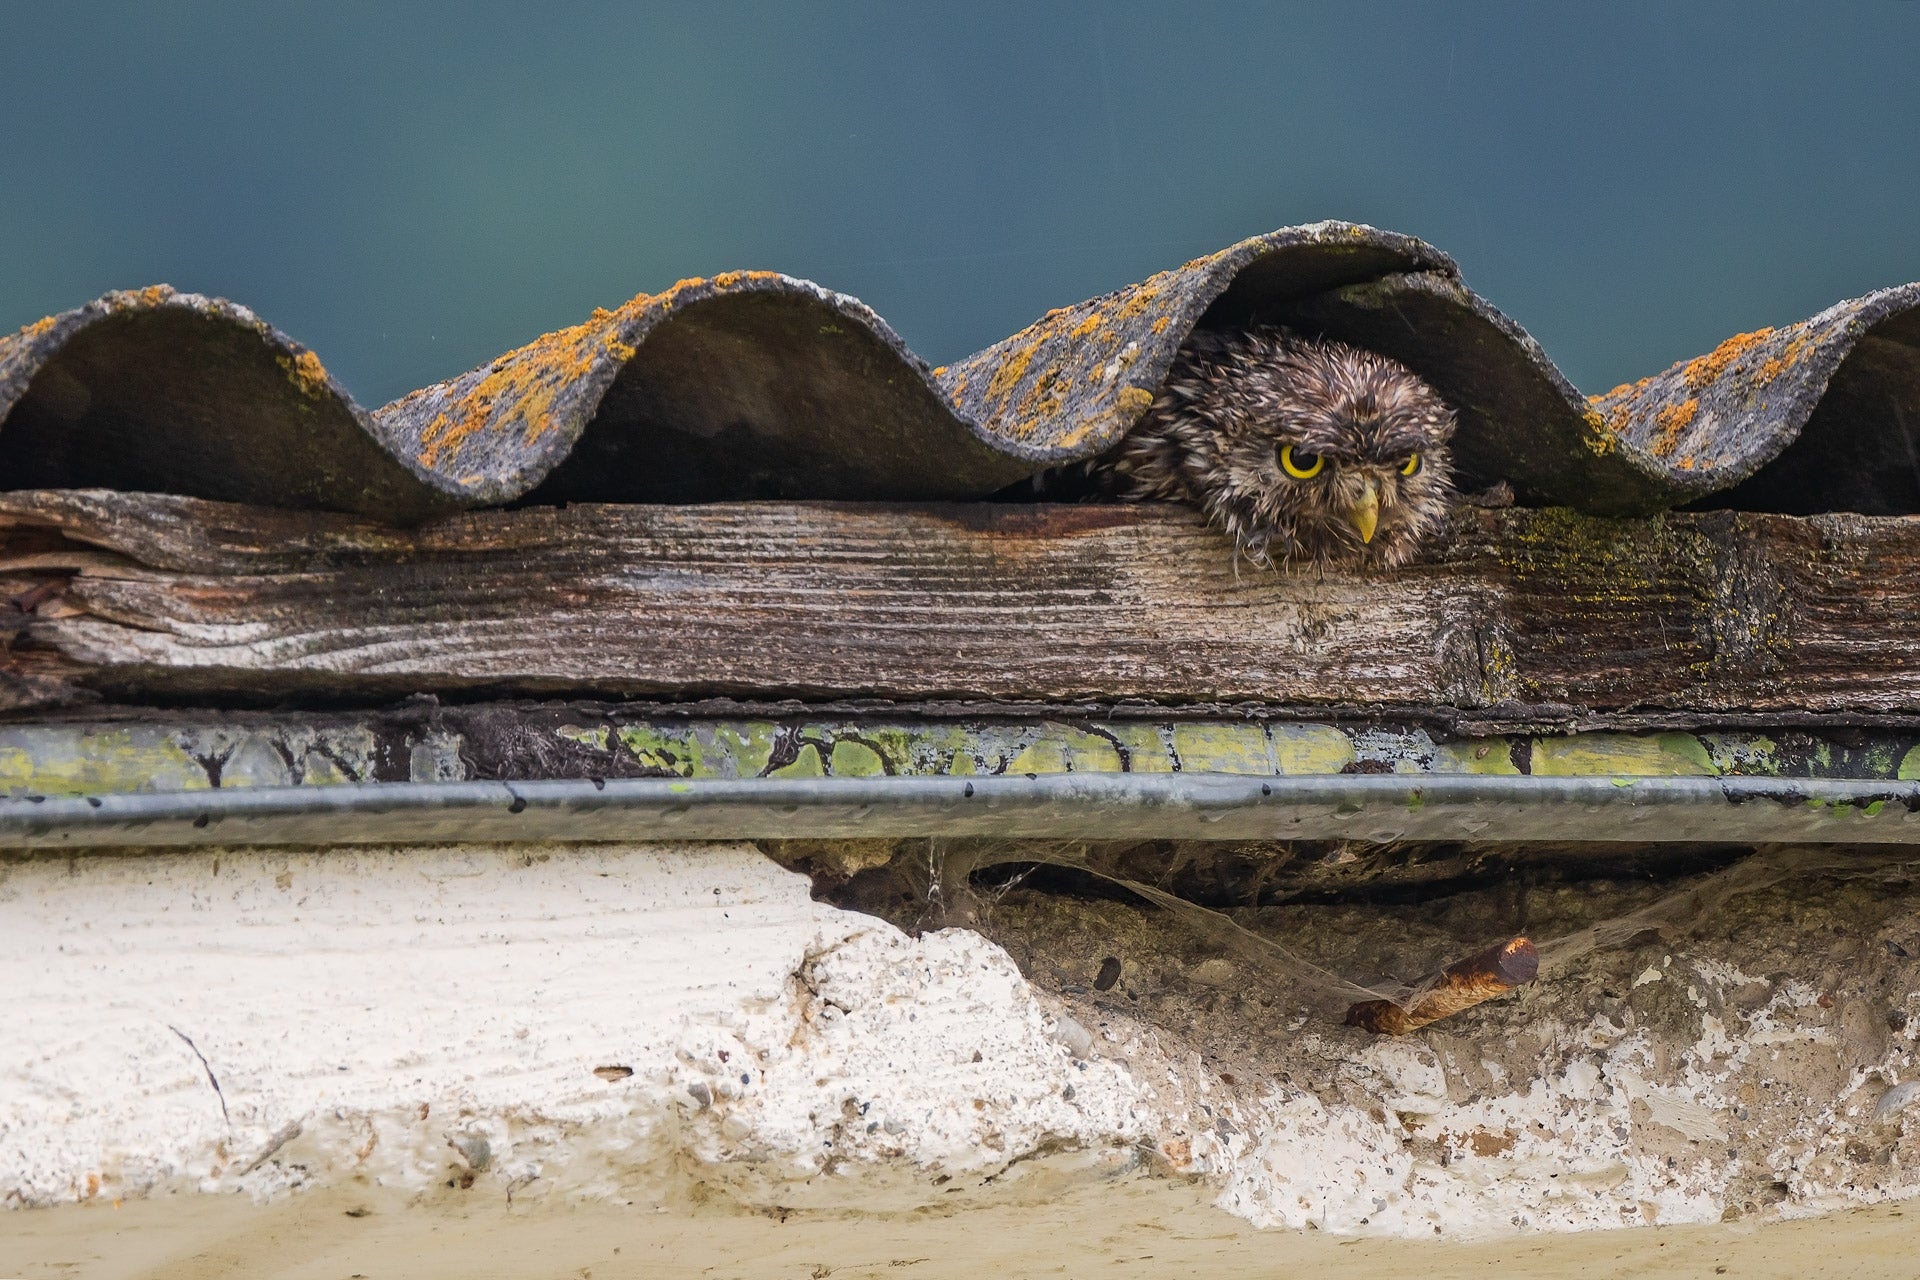 An owl looks annoyed as it sits under a house's roof. (Photo: Laszlo Potozky)